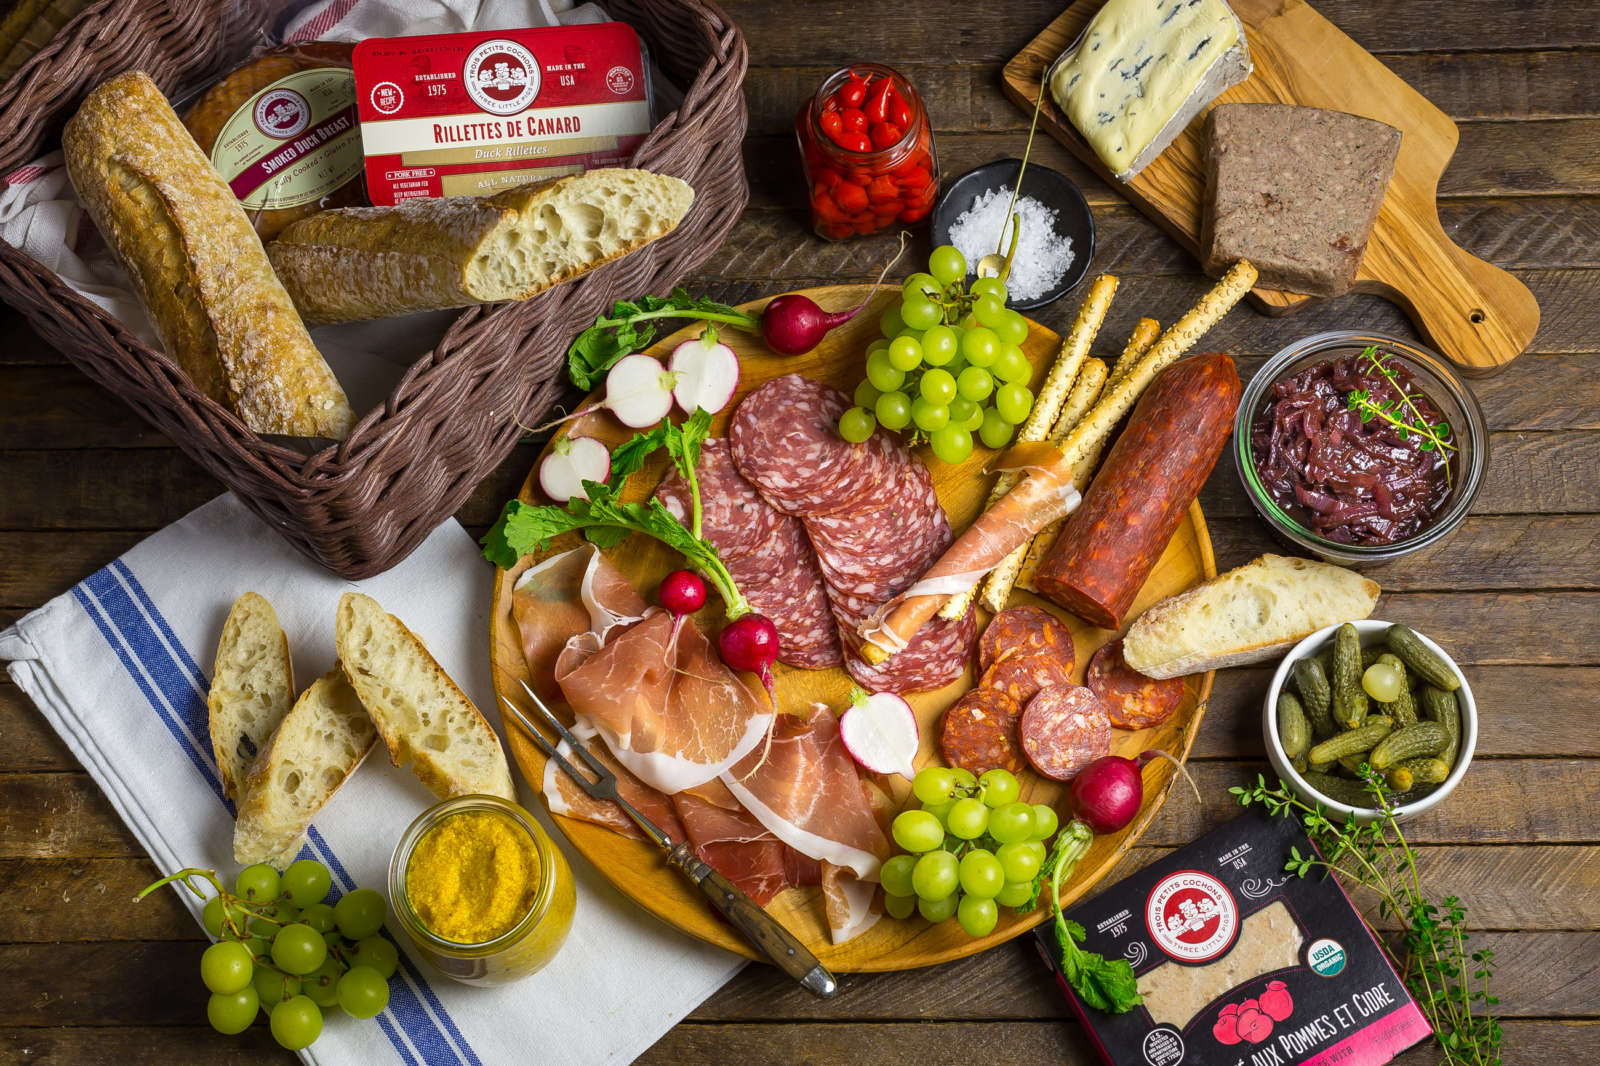 How to put together a perfect charcuterie board